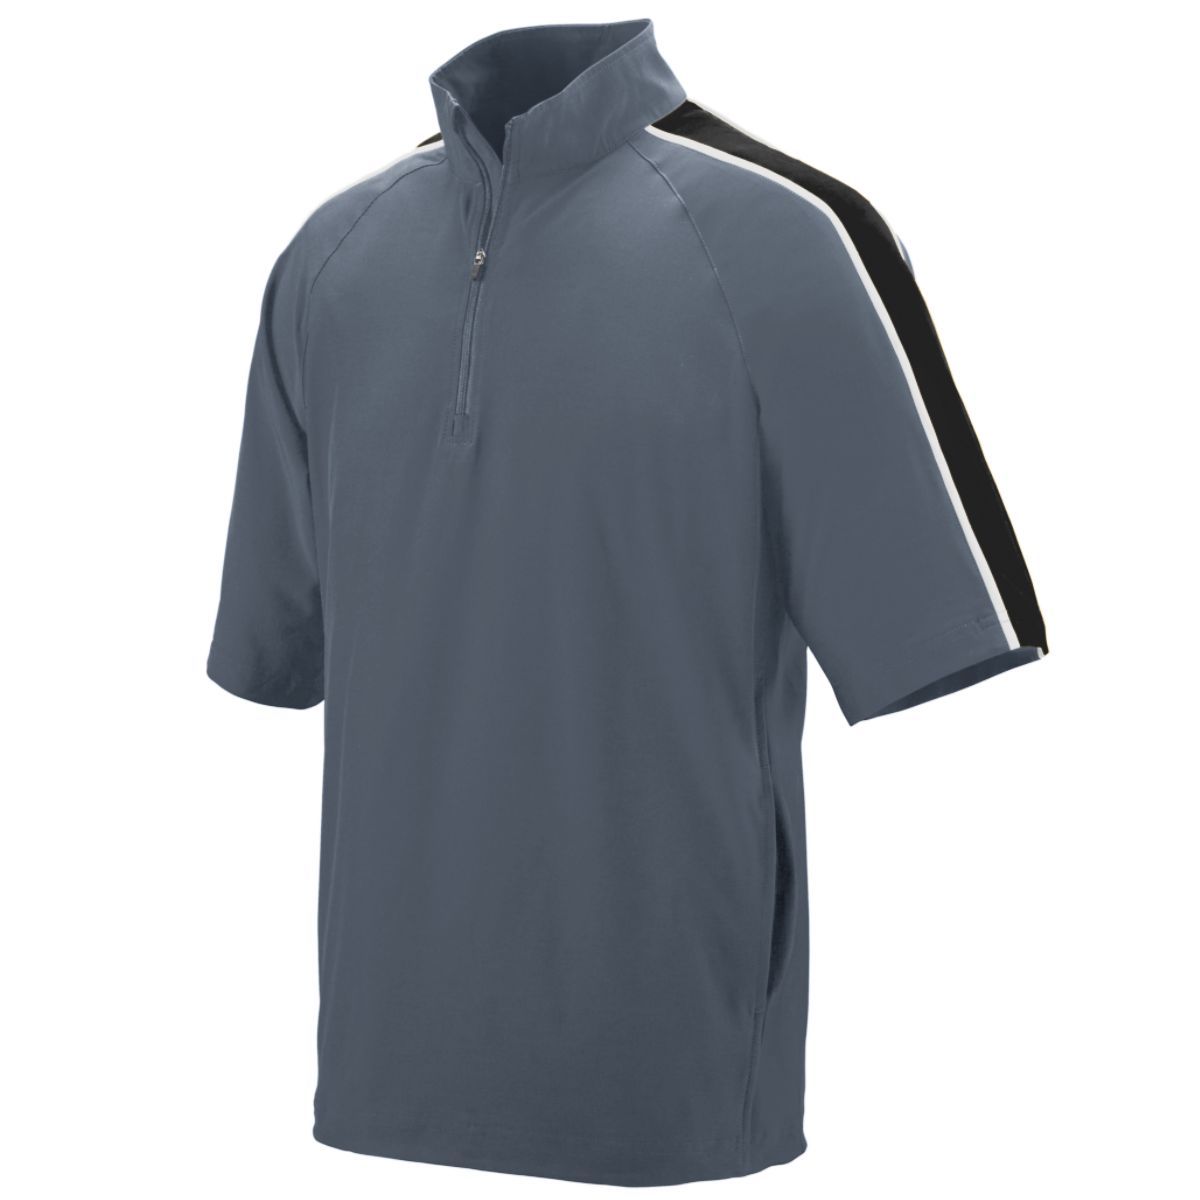 Augusta Sportswear Quantum Short Sleeve Pullover in Graphite/Black/White  -Part of the Adult, Adult-Jacket, Augusta-Products, Outerwear product lines at KanaleyCreations.com